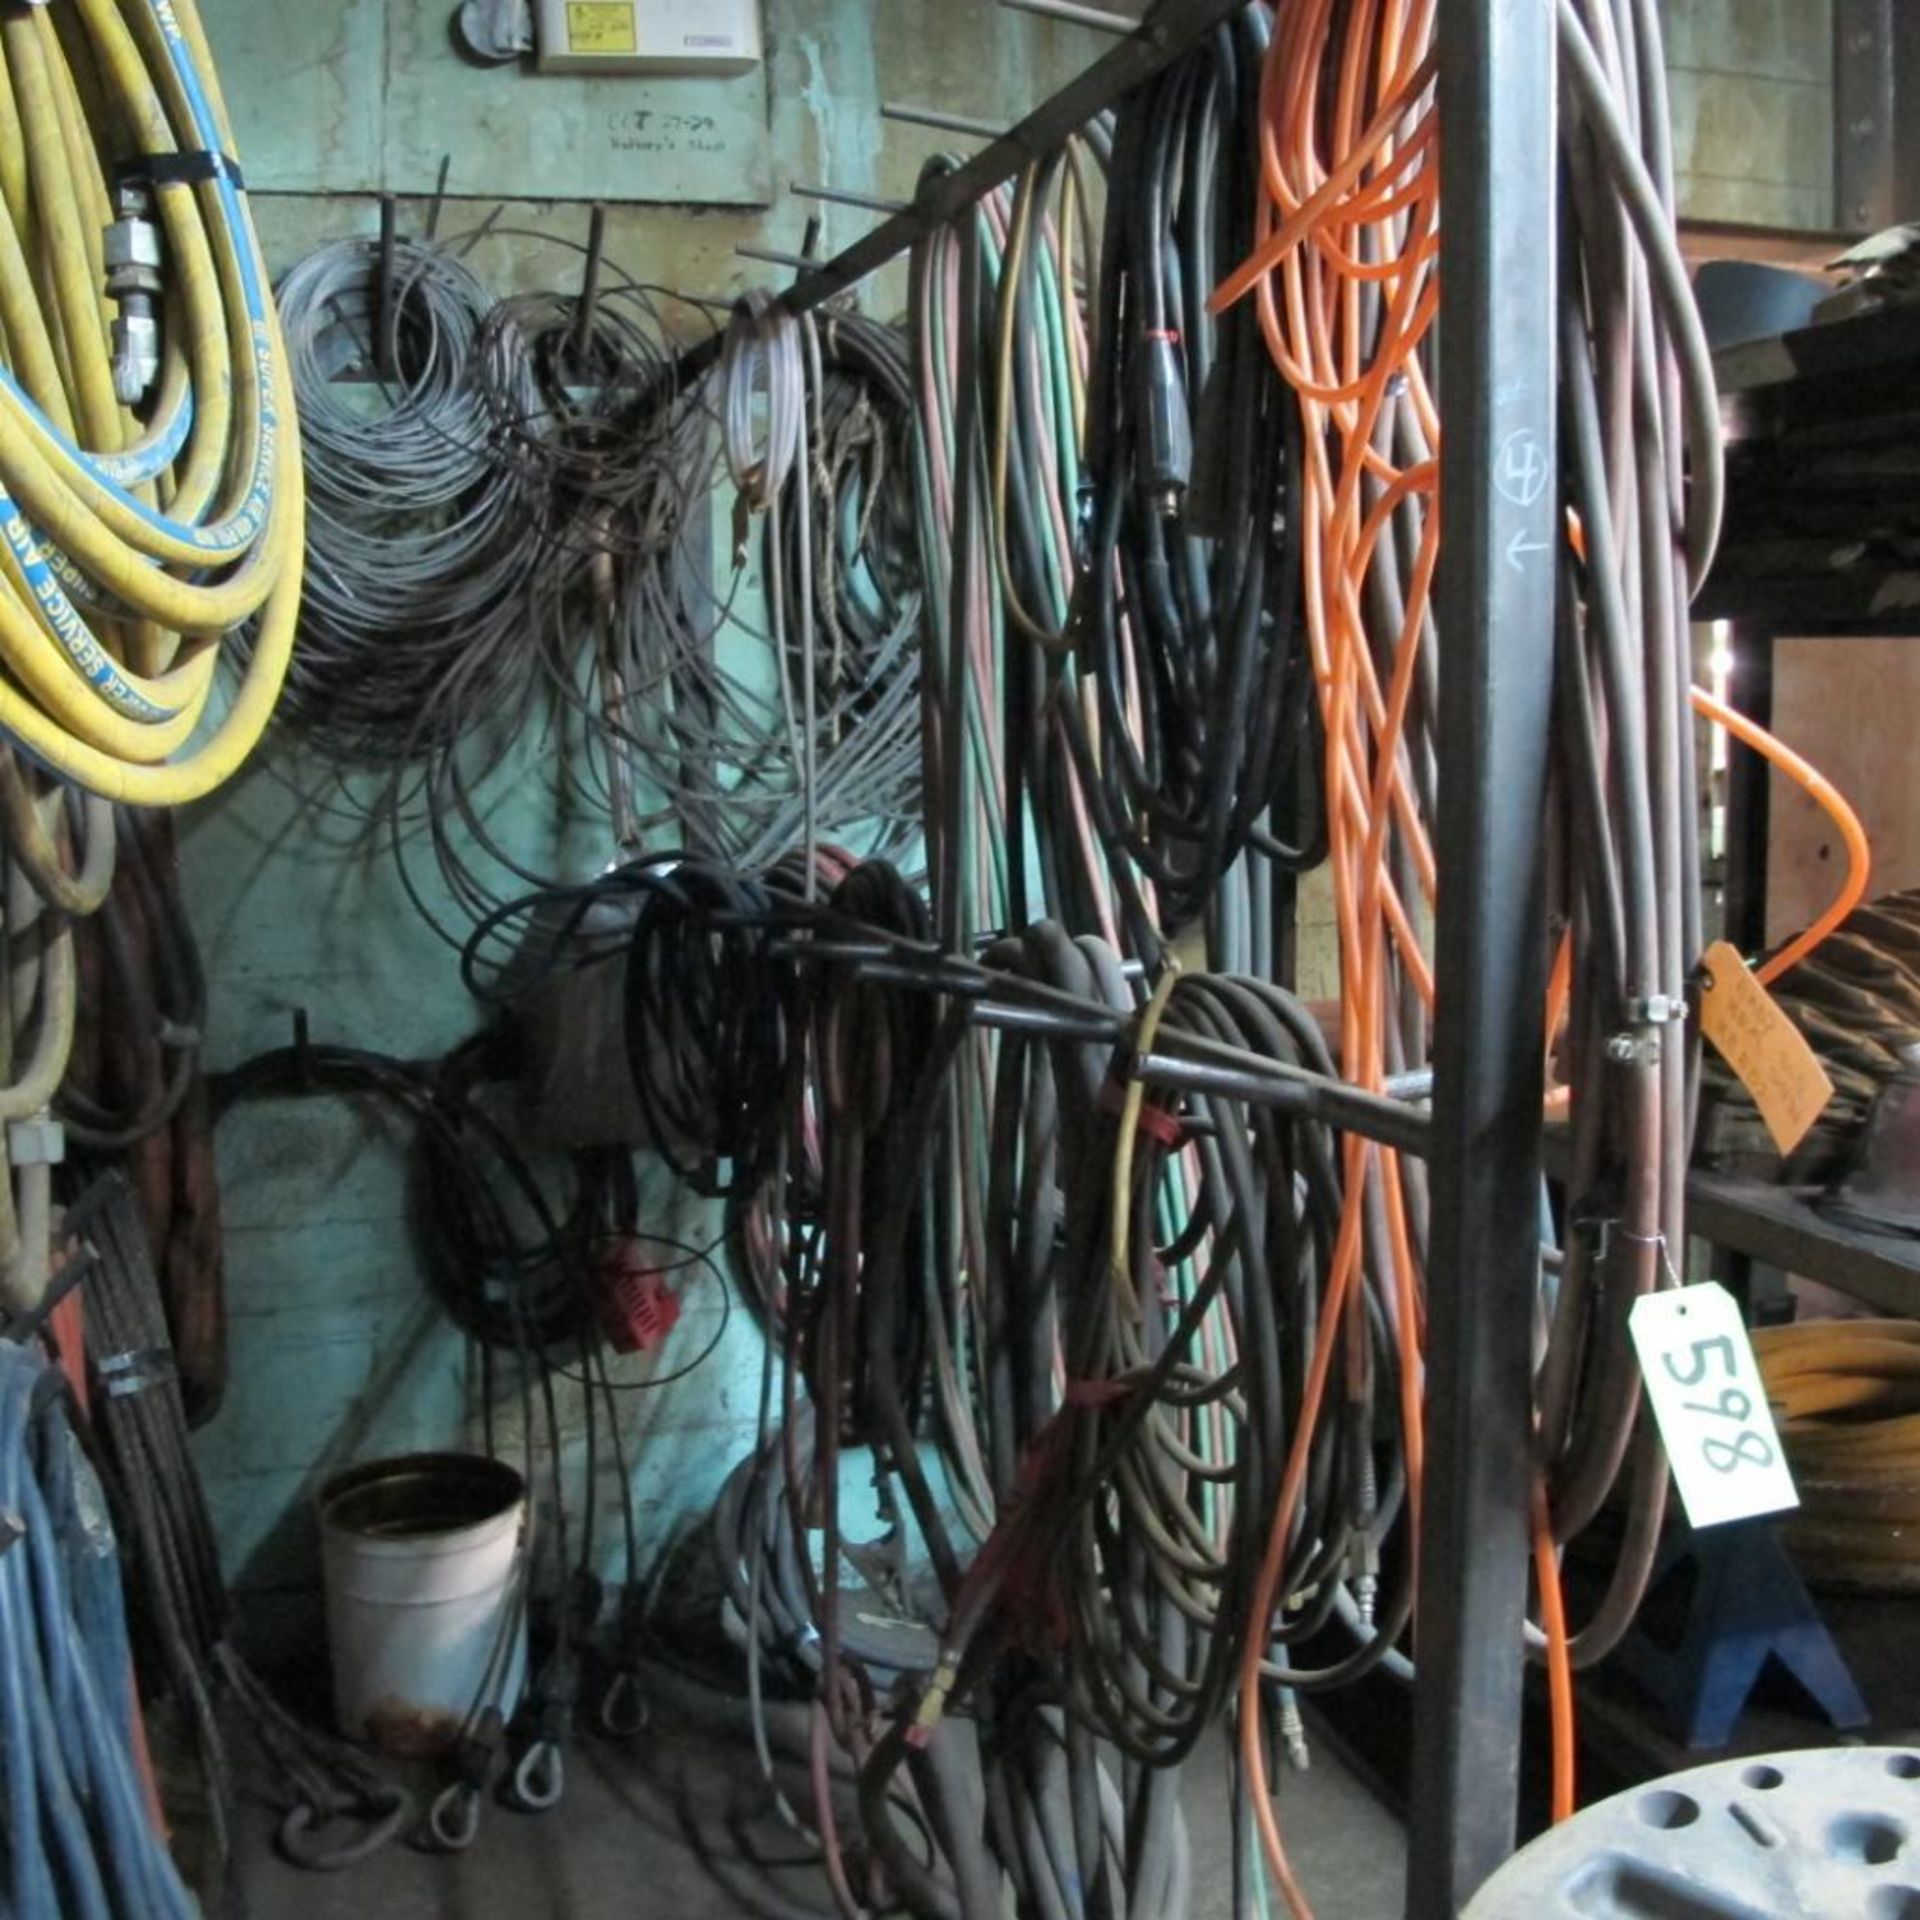 LOT OF HANGING CABLES, WIRE SLINGS, HOSES, STEEL CABLES, WIRE REELS AND HOSES (LOWER CRIB) - Image 4 of 5